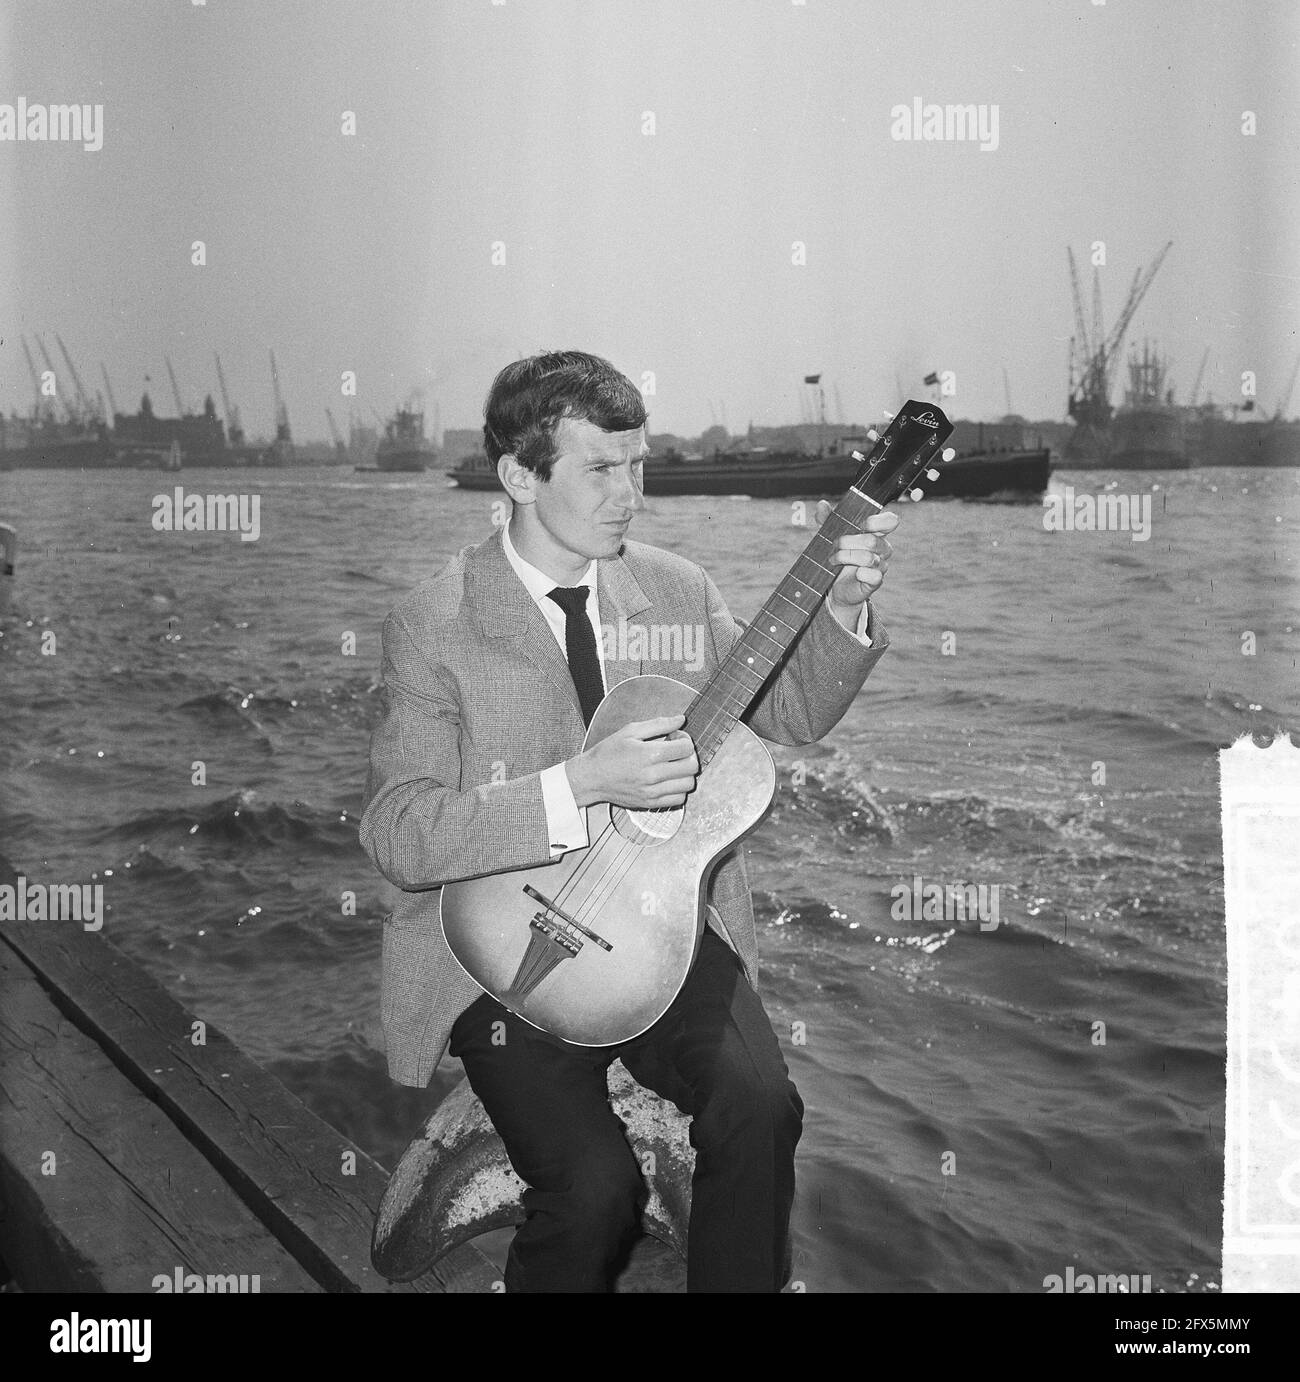 Gerard Cox in TV show of NCRV, singer Dutch chanson here at the port of Rotterdam, May 20, 1964, TV shows, guitars, ports, singers, The Netherlands, 20th century press agency photo, news to remember, documentary, historic photography 1945-1990, visual stories, human history of the Twentieth Century, capturing moments in time Stock Photo